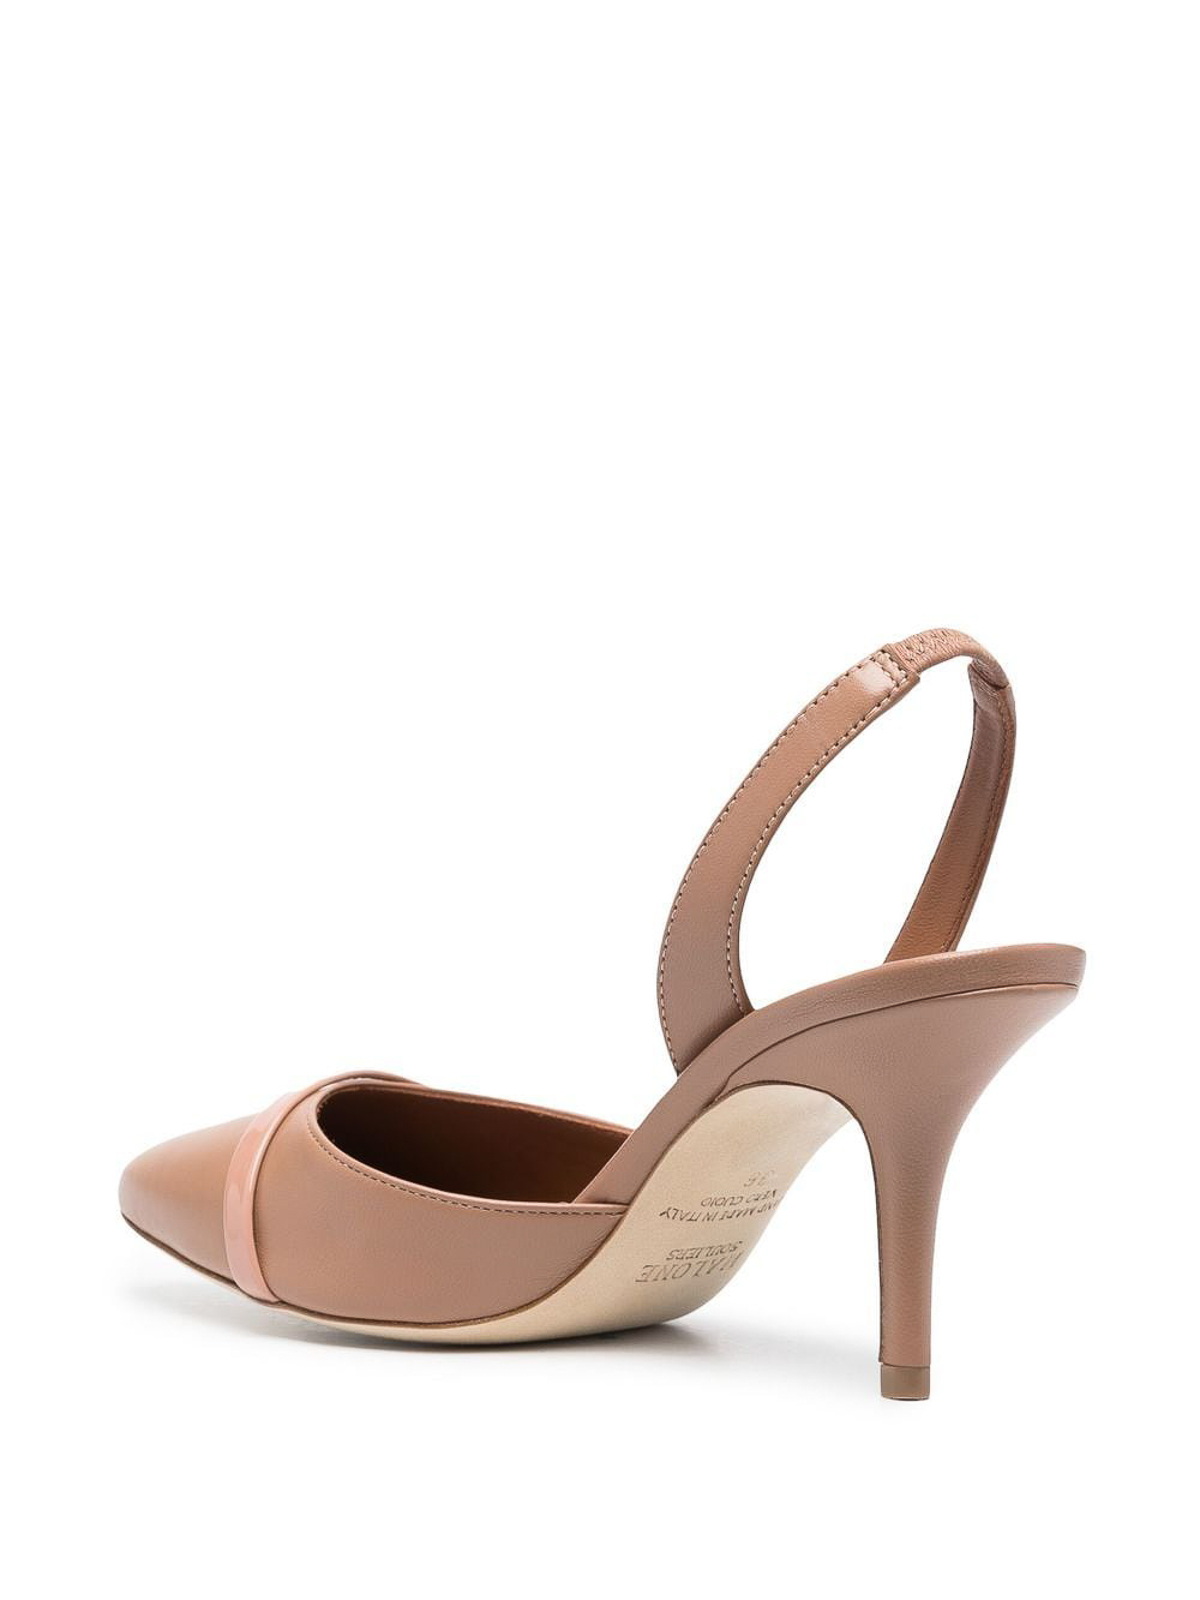 Shop Malone Souliers Elsie 70 Leather Pumps In Nude & Neutrals